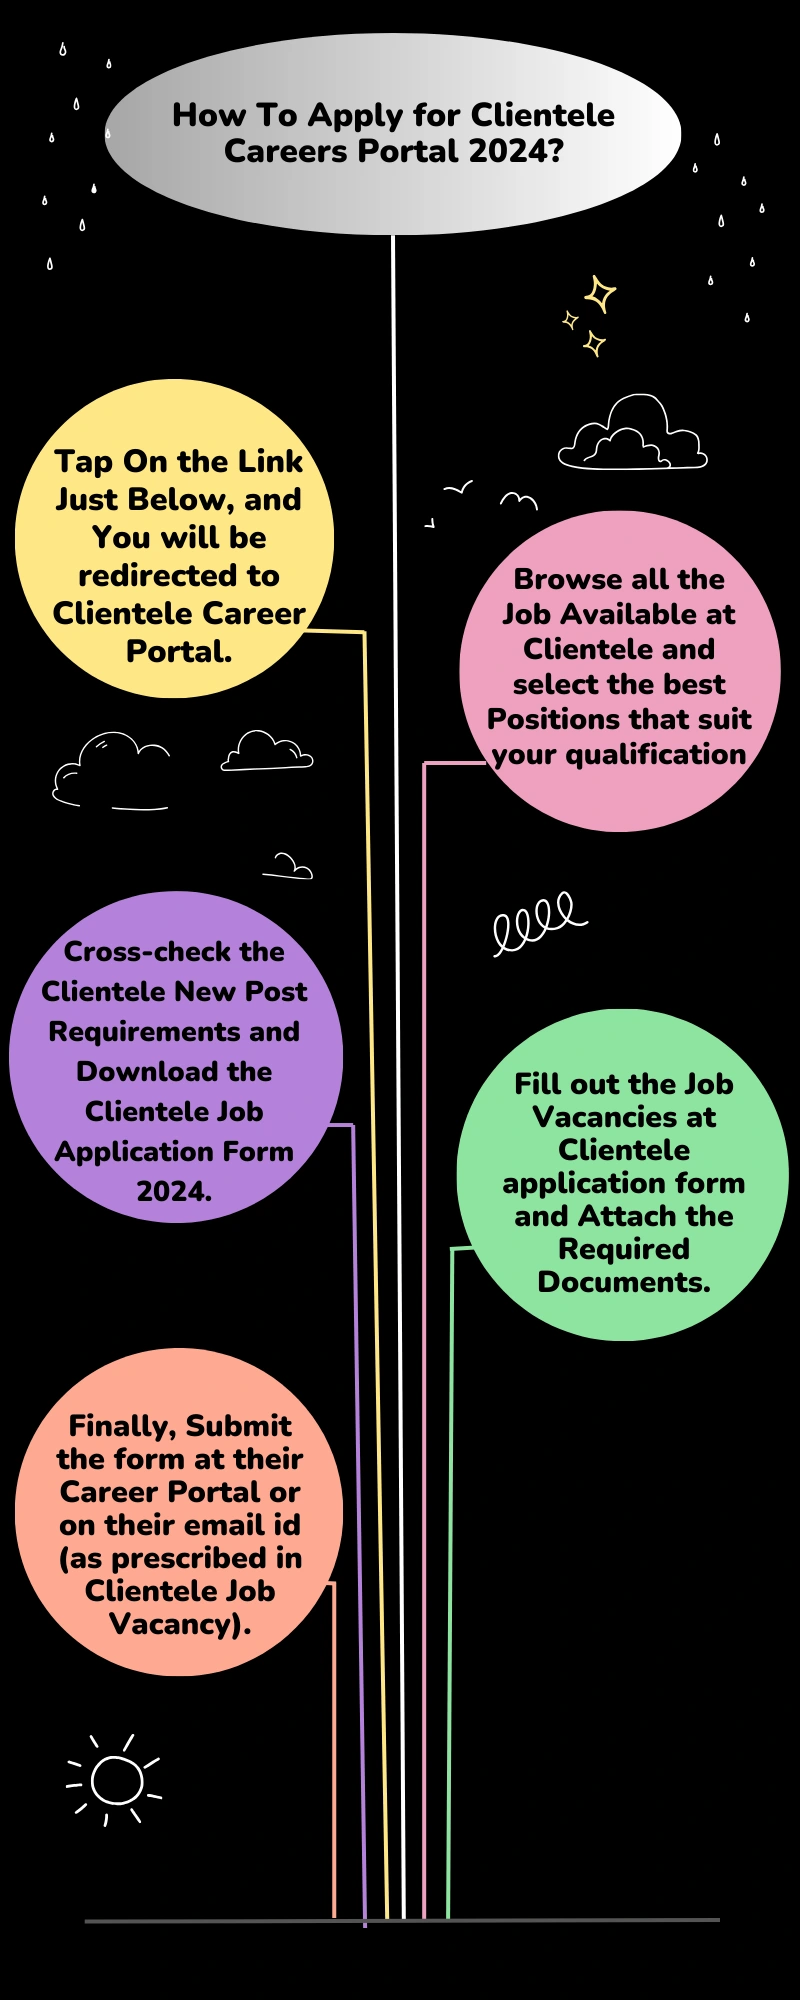 How To Apply for Clientele Careers Portal 2024?